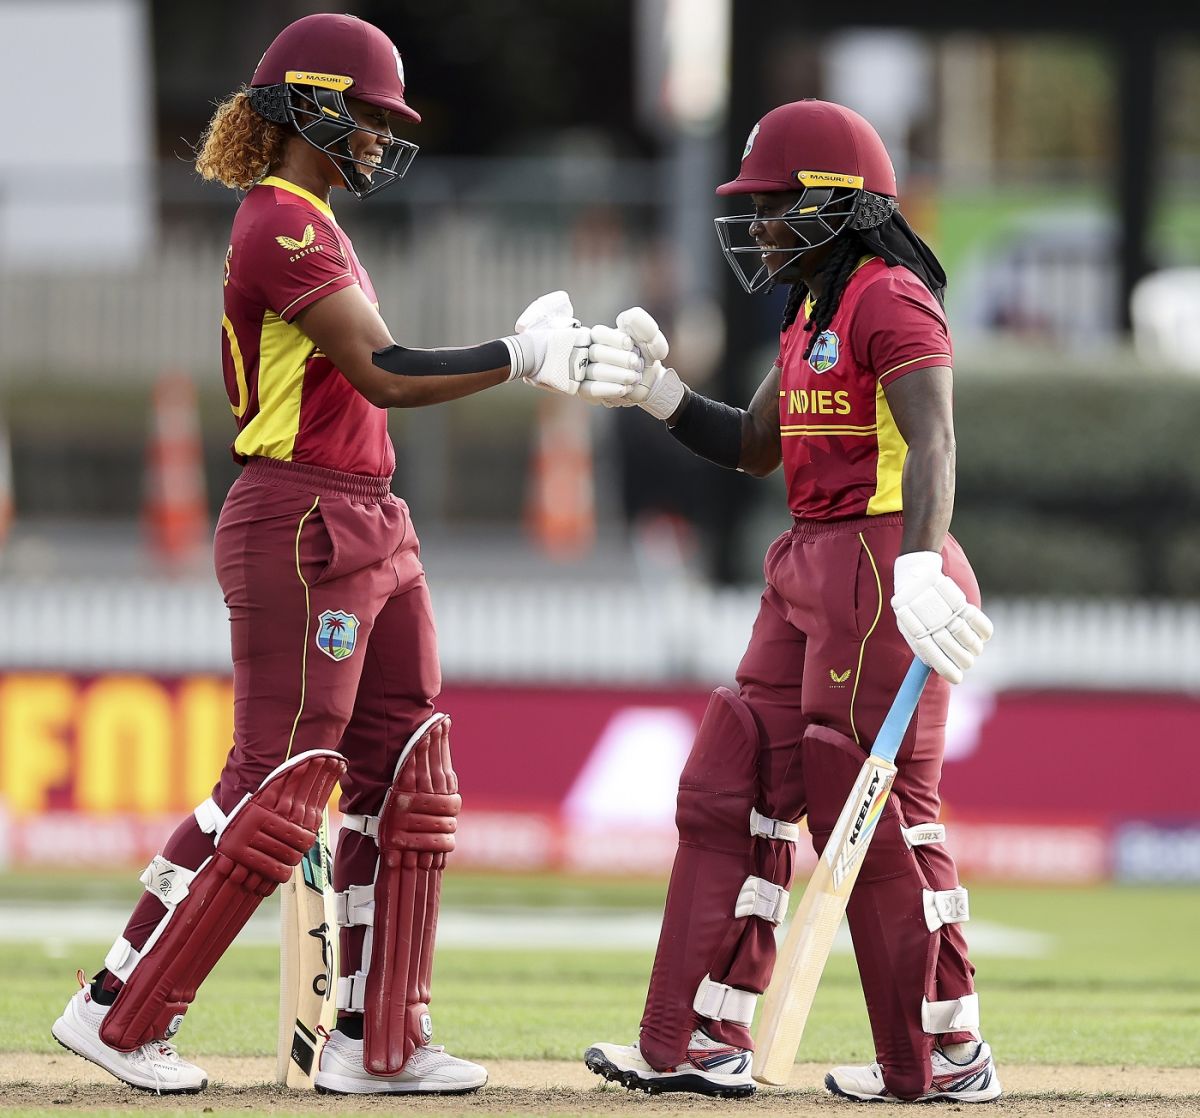 Hayley Matthews and Deandra Dottin added first century-run opening stand for West Indies in World Cups, West Indies vs India, Women's World Cup 2022, Hamilton, March 12, 2022